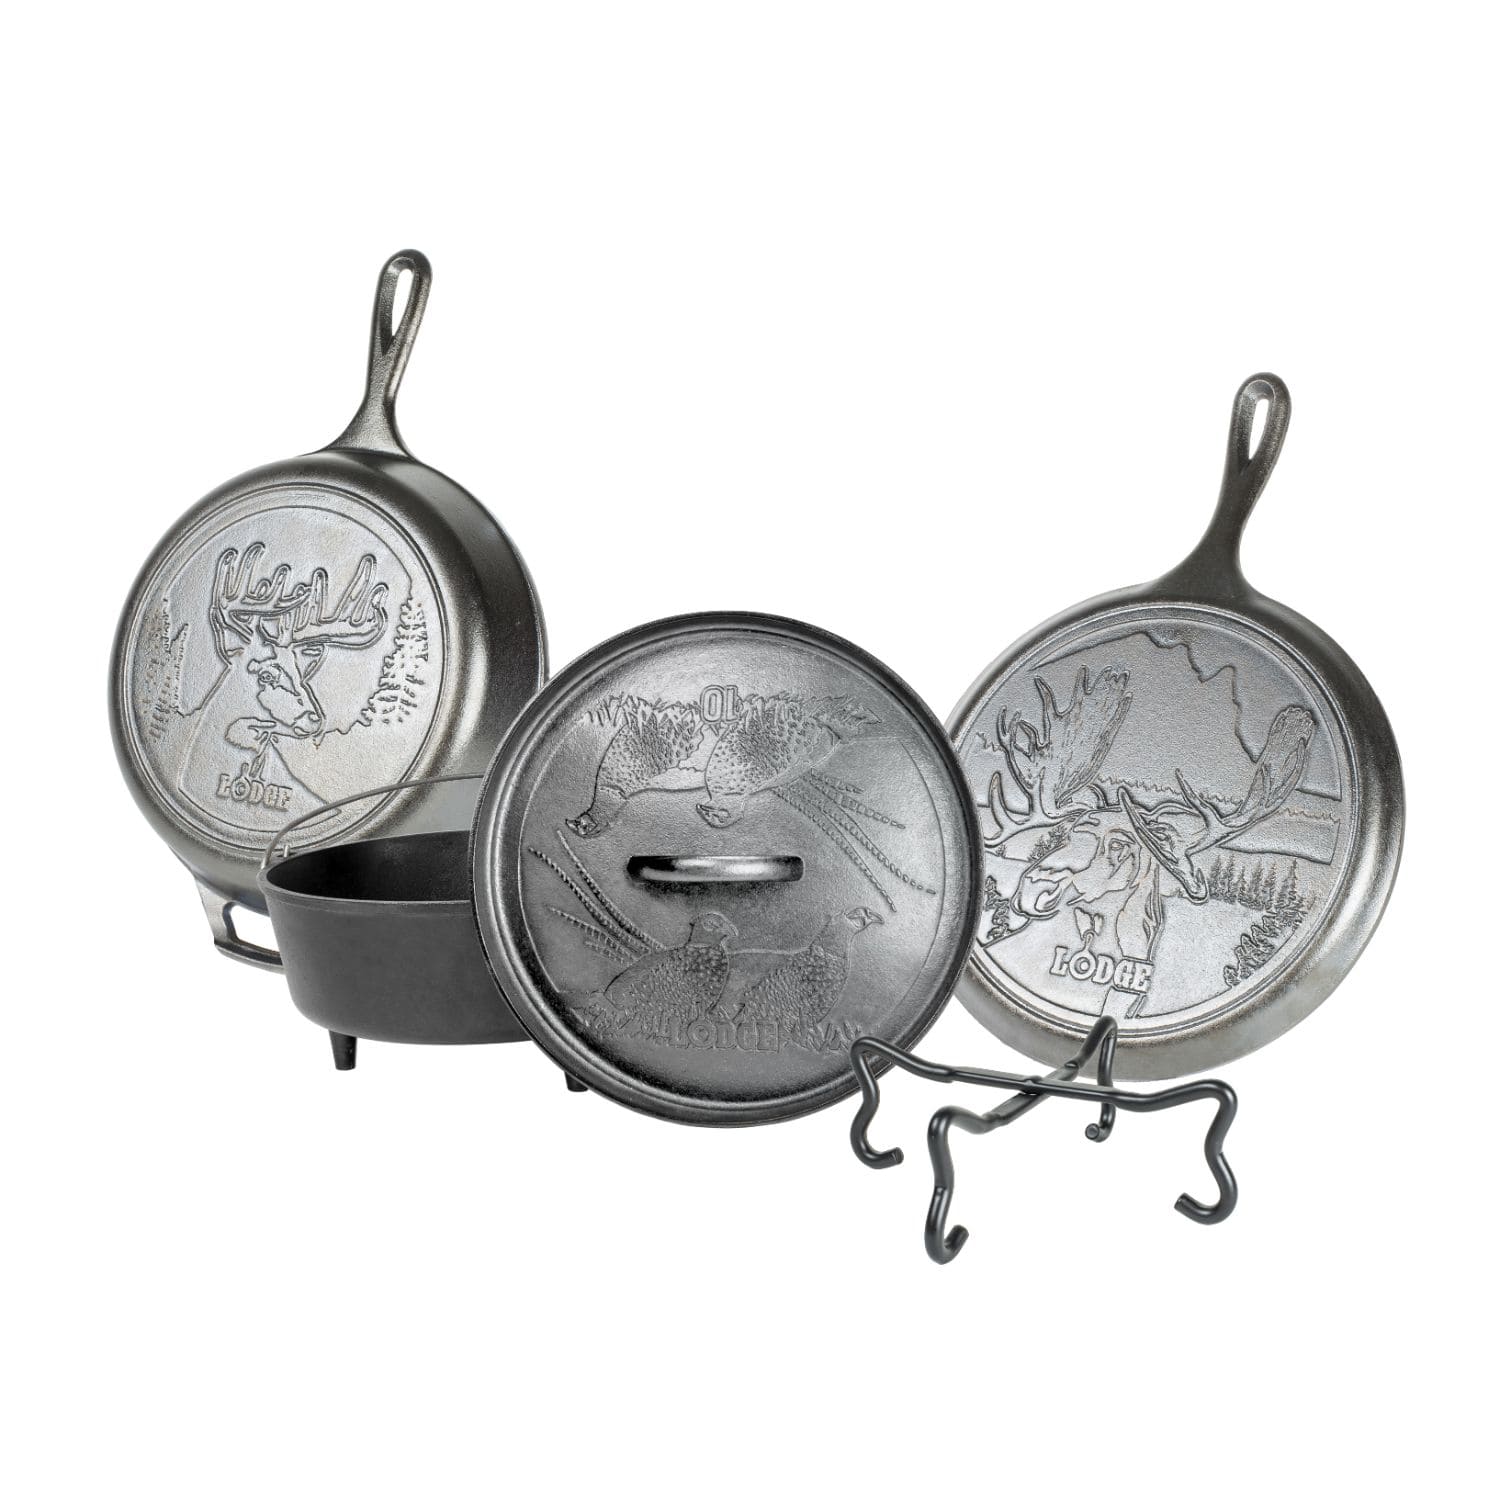 Lodge Mfg Camping & Outdoor : Cooking Lodge Wildlife Series 5 Piece Set